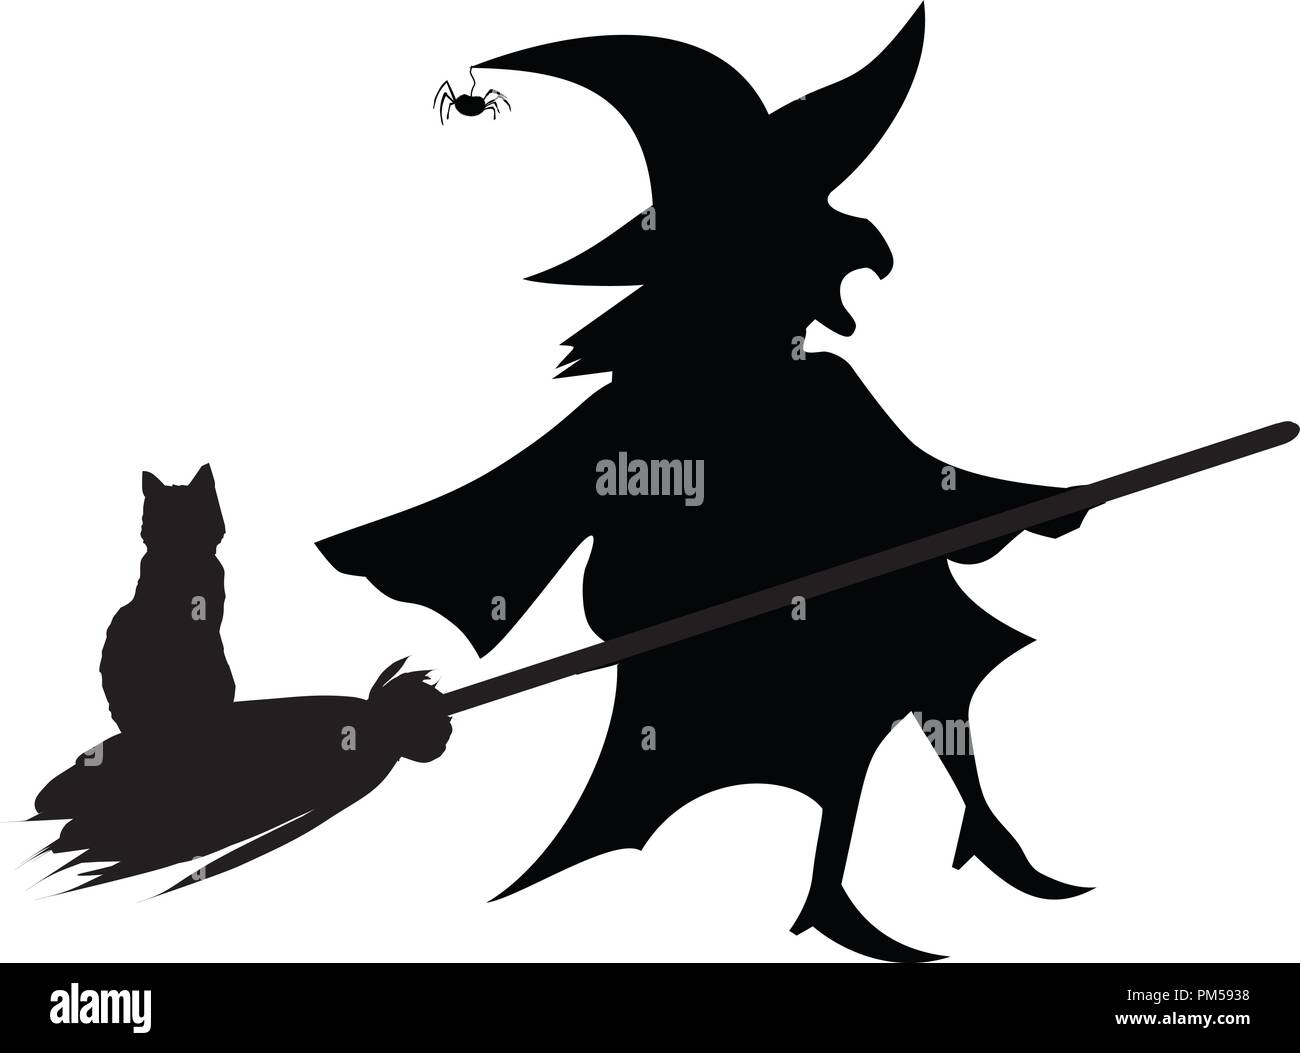 Black silhouette of witch in hat and costume flying on broom with cat isolated on white background. Halloween party vector illustration, icon, retro v Stock Vector